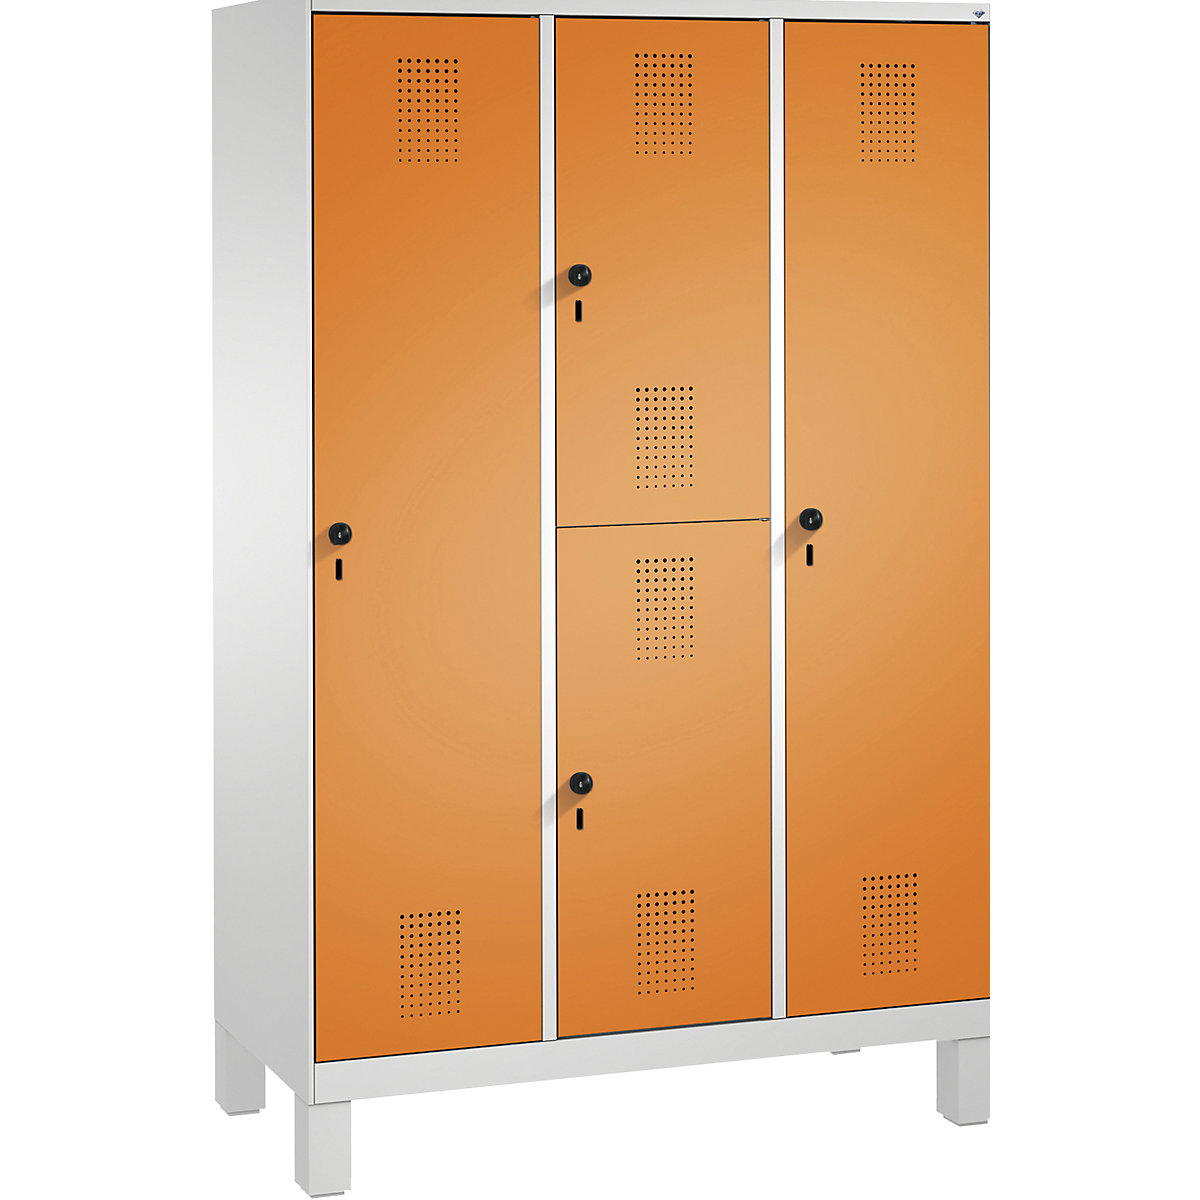 EVOLO combination cupboard, single and double tier – C+P, 3 compartments, 4 doors, compartment width 400 mm, with feet, light grey / yellow orange